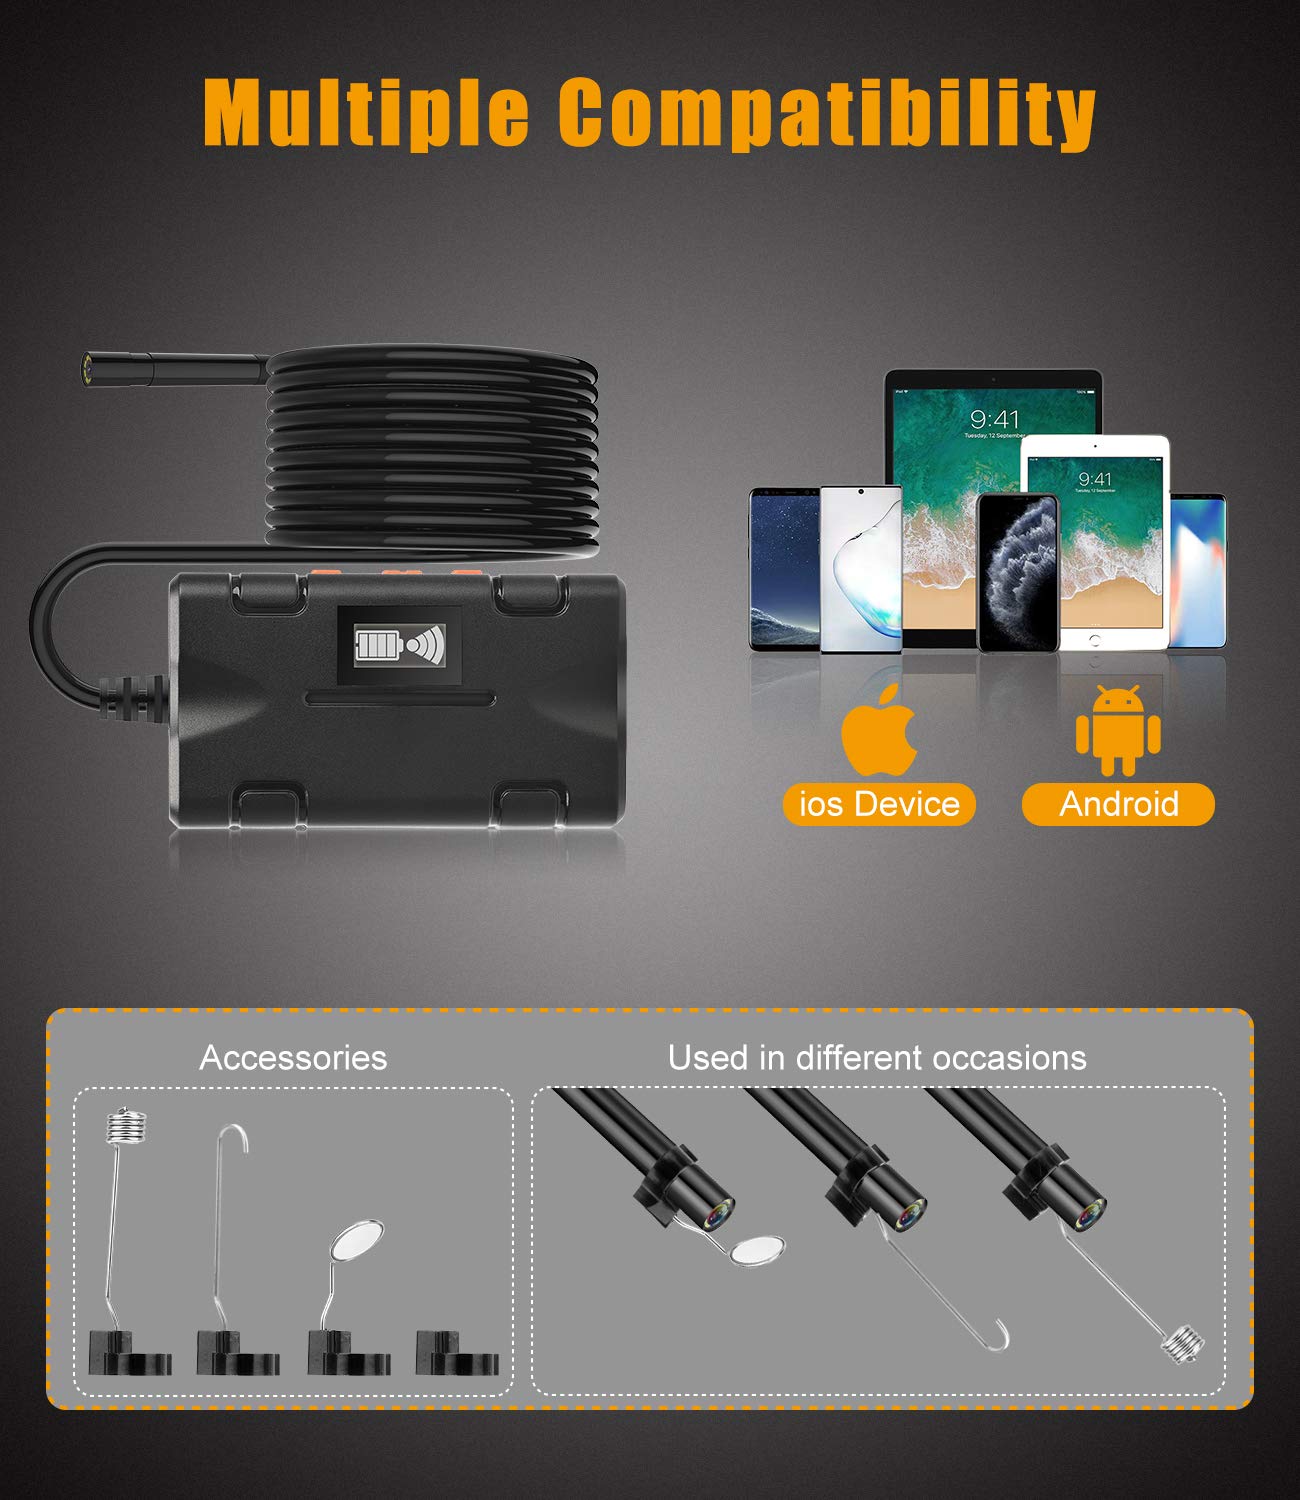 HD 1080P Waterproof Smart WIFI Endoscope 8mm Inspection Snake Camera Borescope Video Camera with 2600mAh Battery for IOS/Android